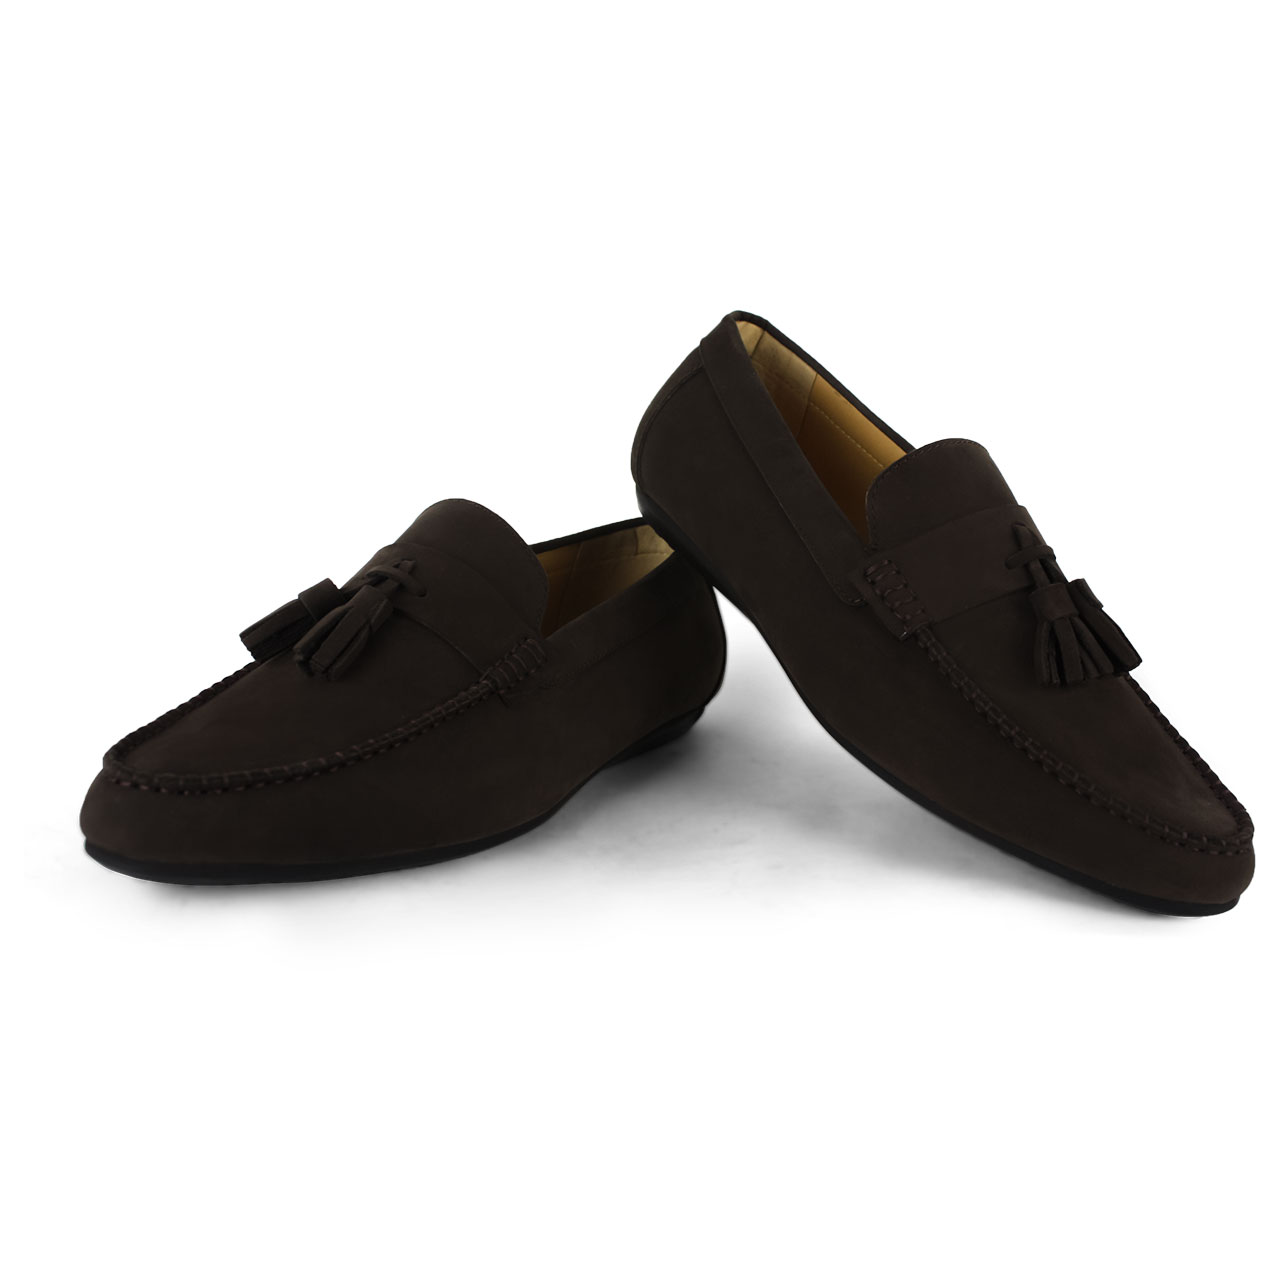 Suede Comfort Mens Casual Brown Loafers Tassels Kiltie Shoes